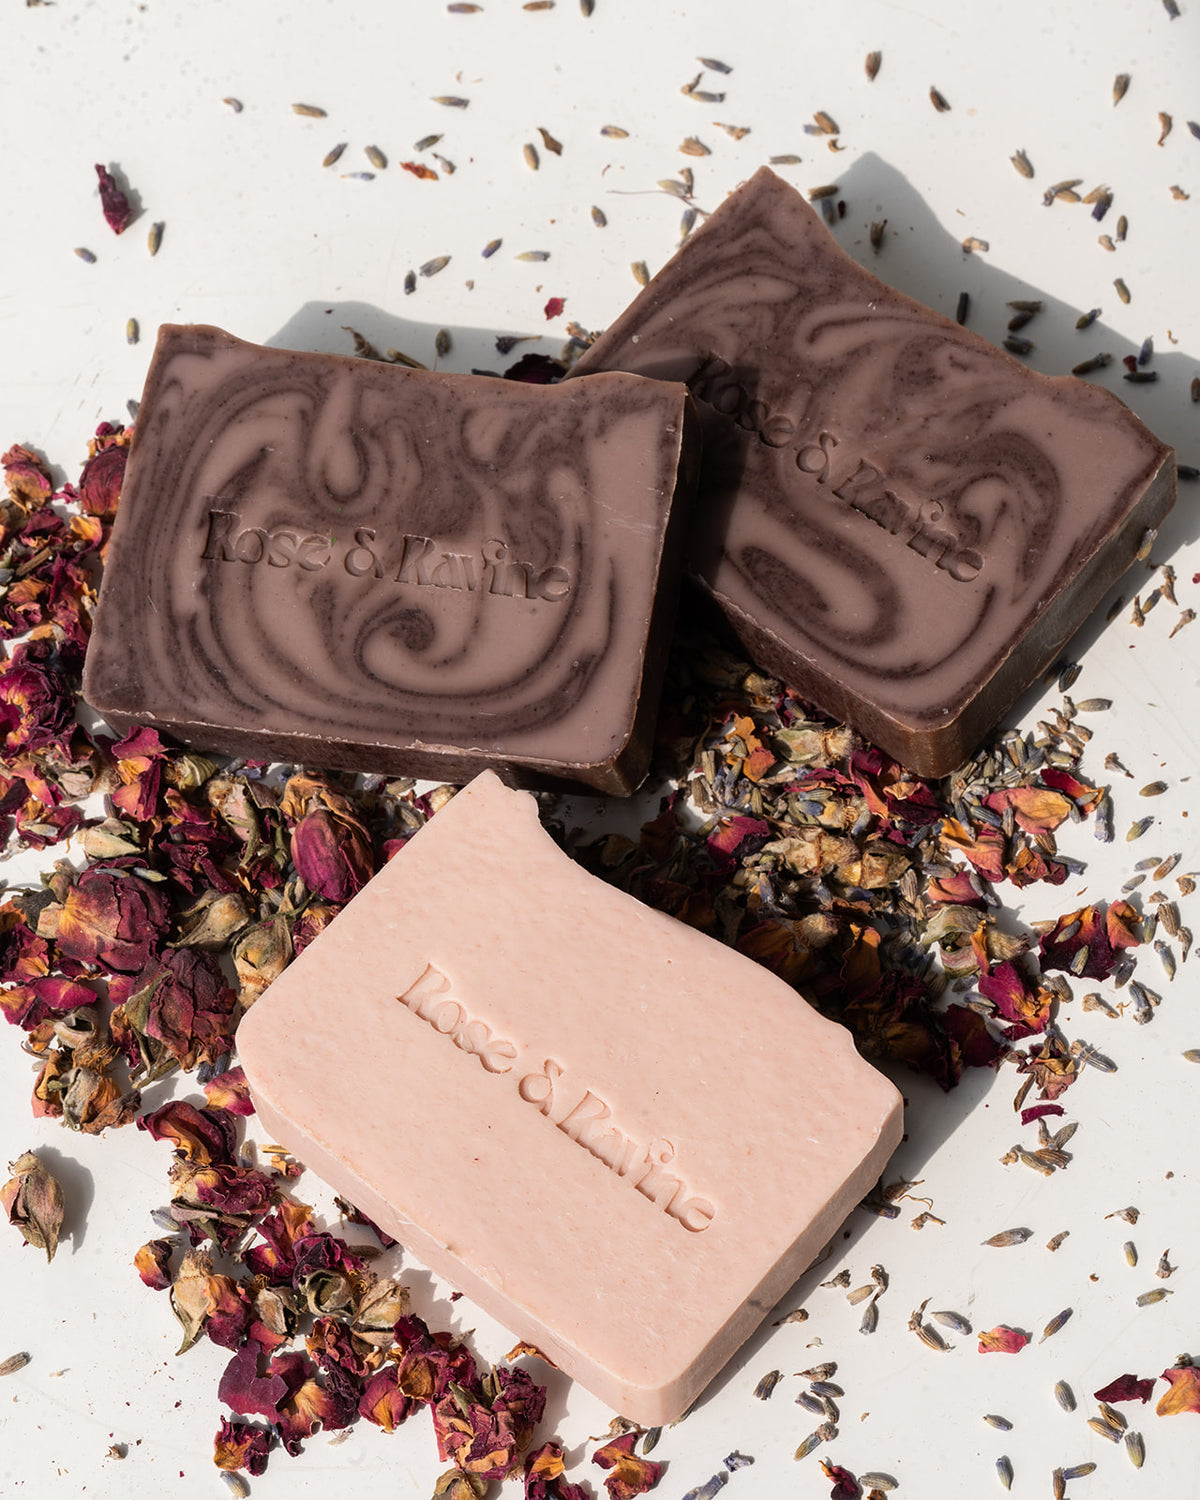 Rosehips and Lavender Soap, Rose and Ravine